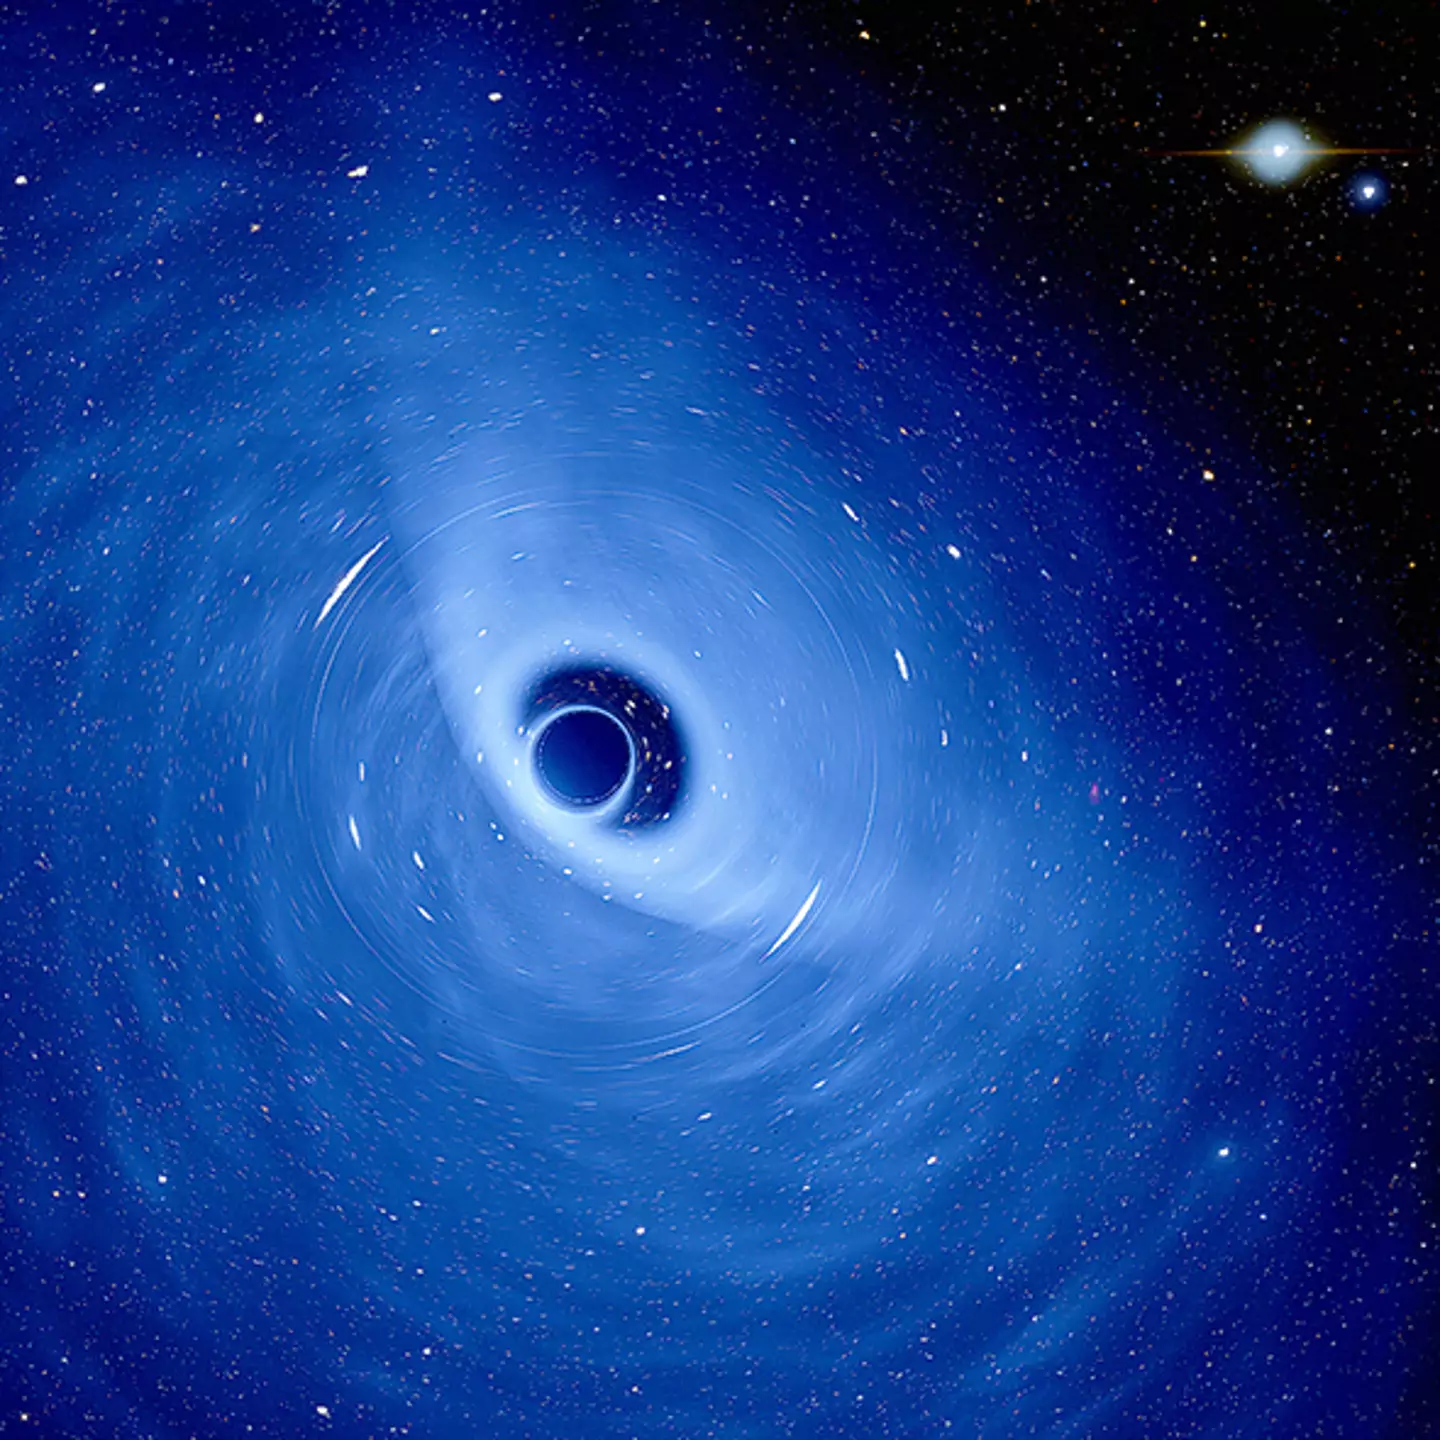 Black holes may lurk much closer to Earth than we realized